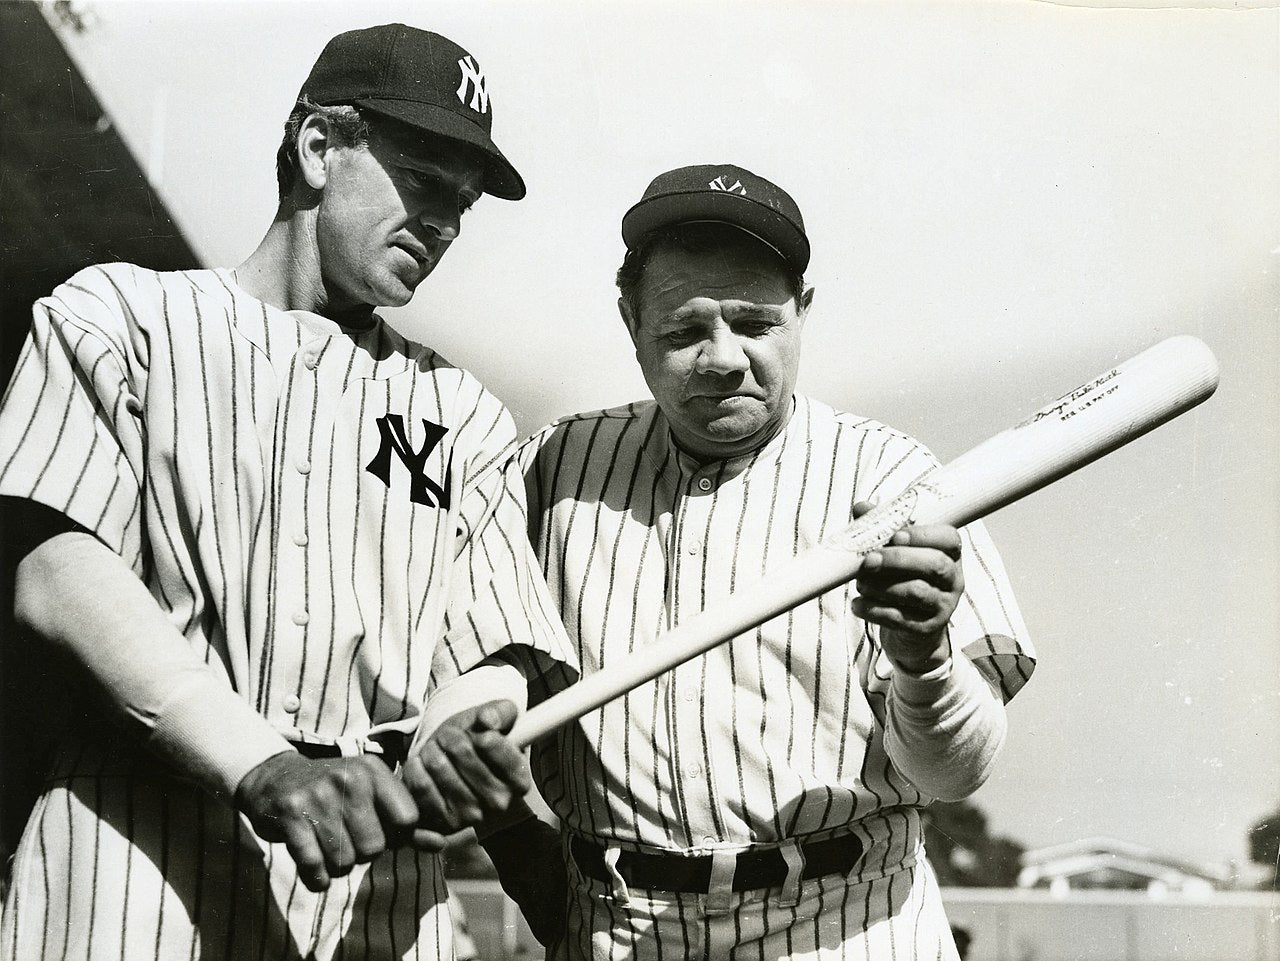 Gary Cooper with Babe Ruth in The Pride of the Yankees